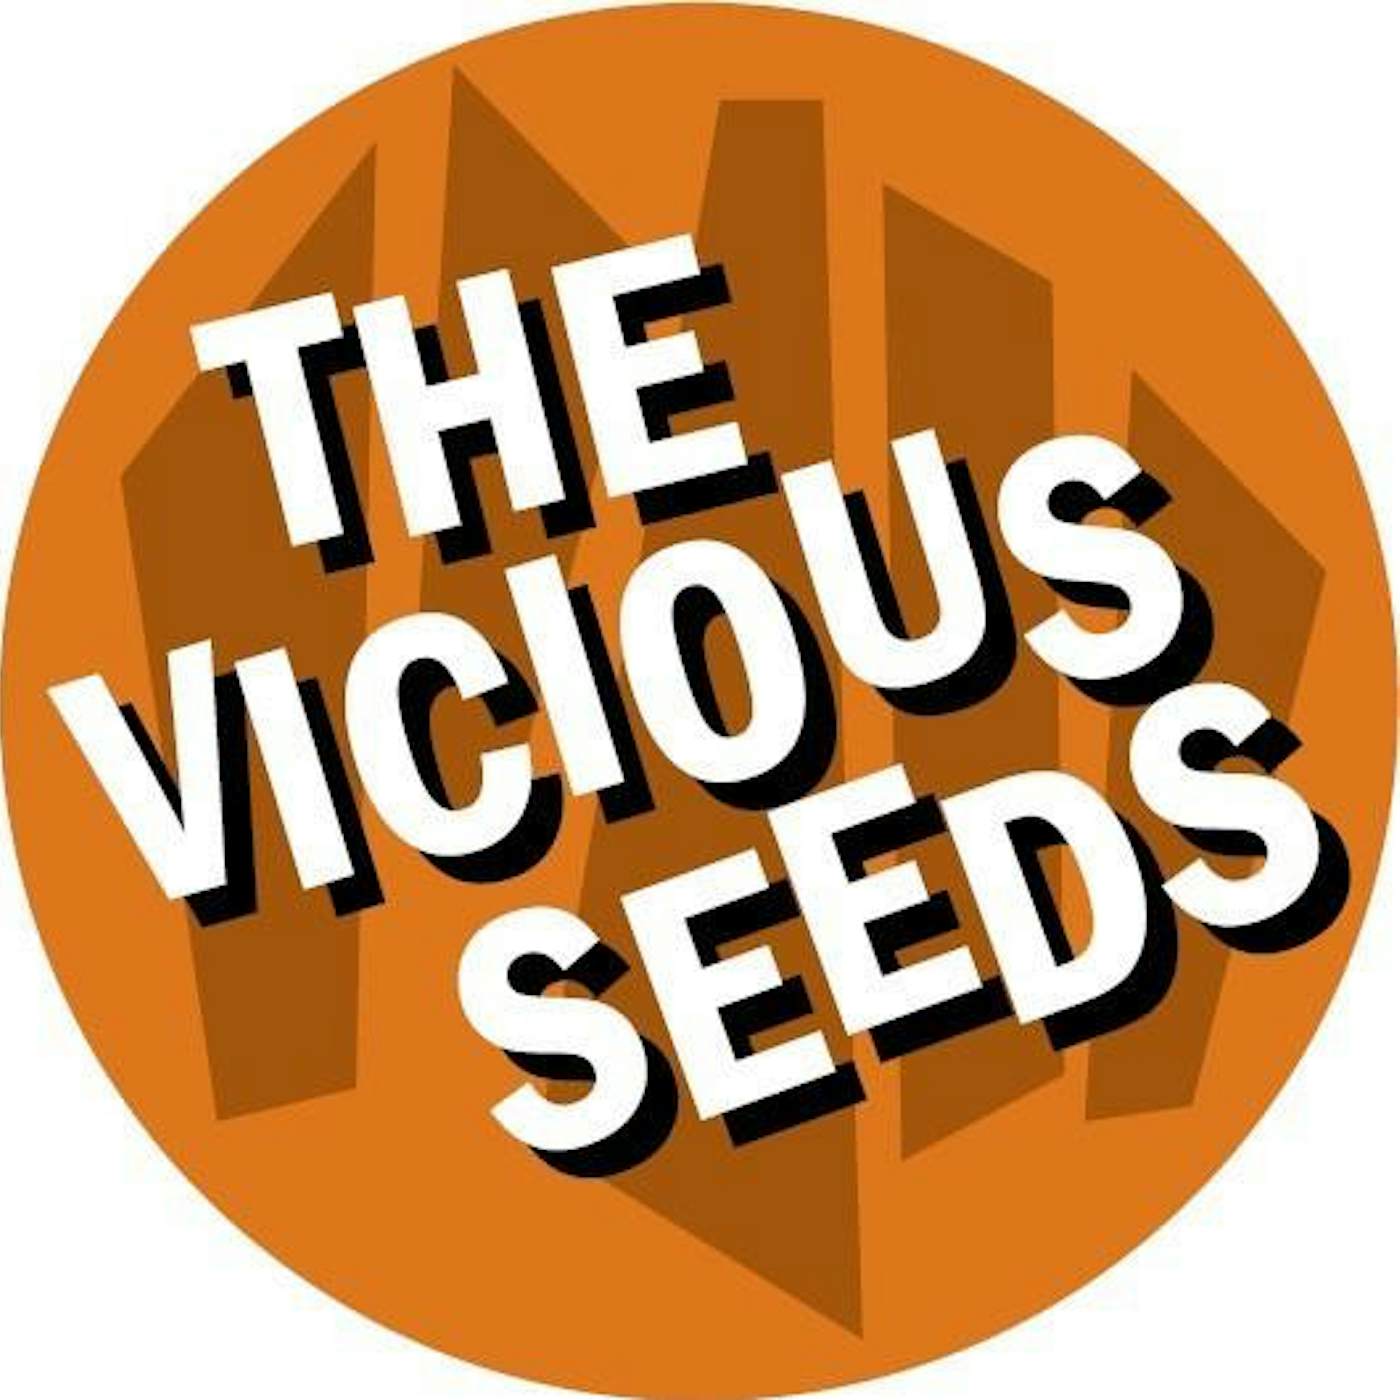 The Vicious Seeds